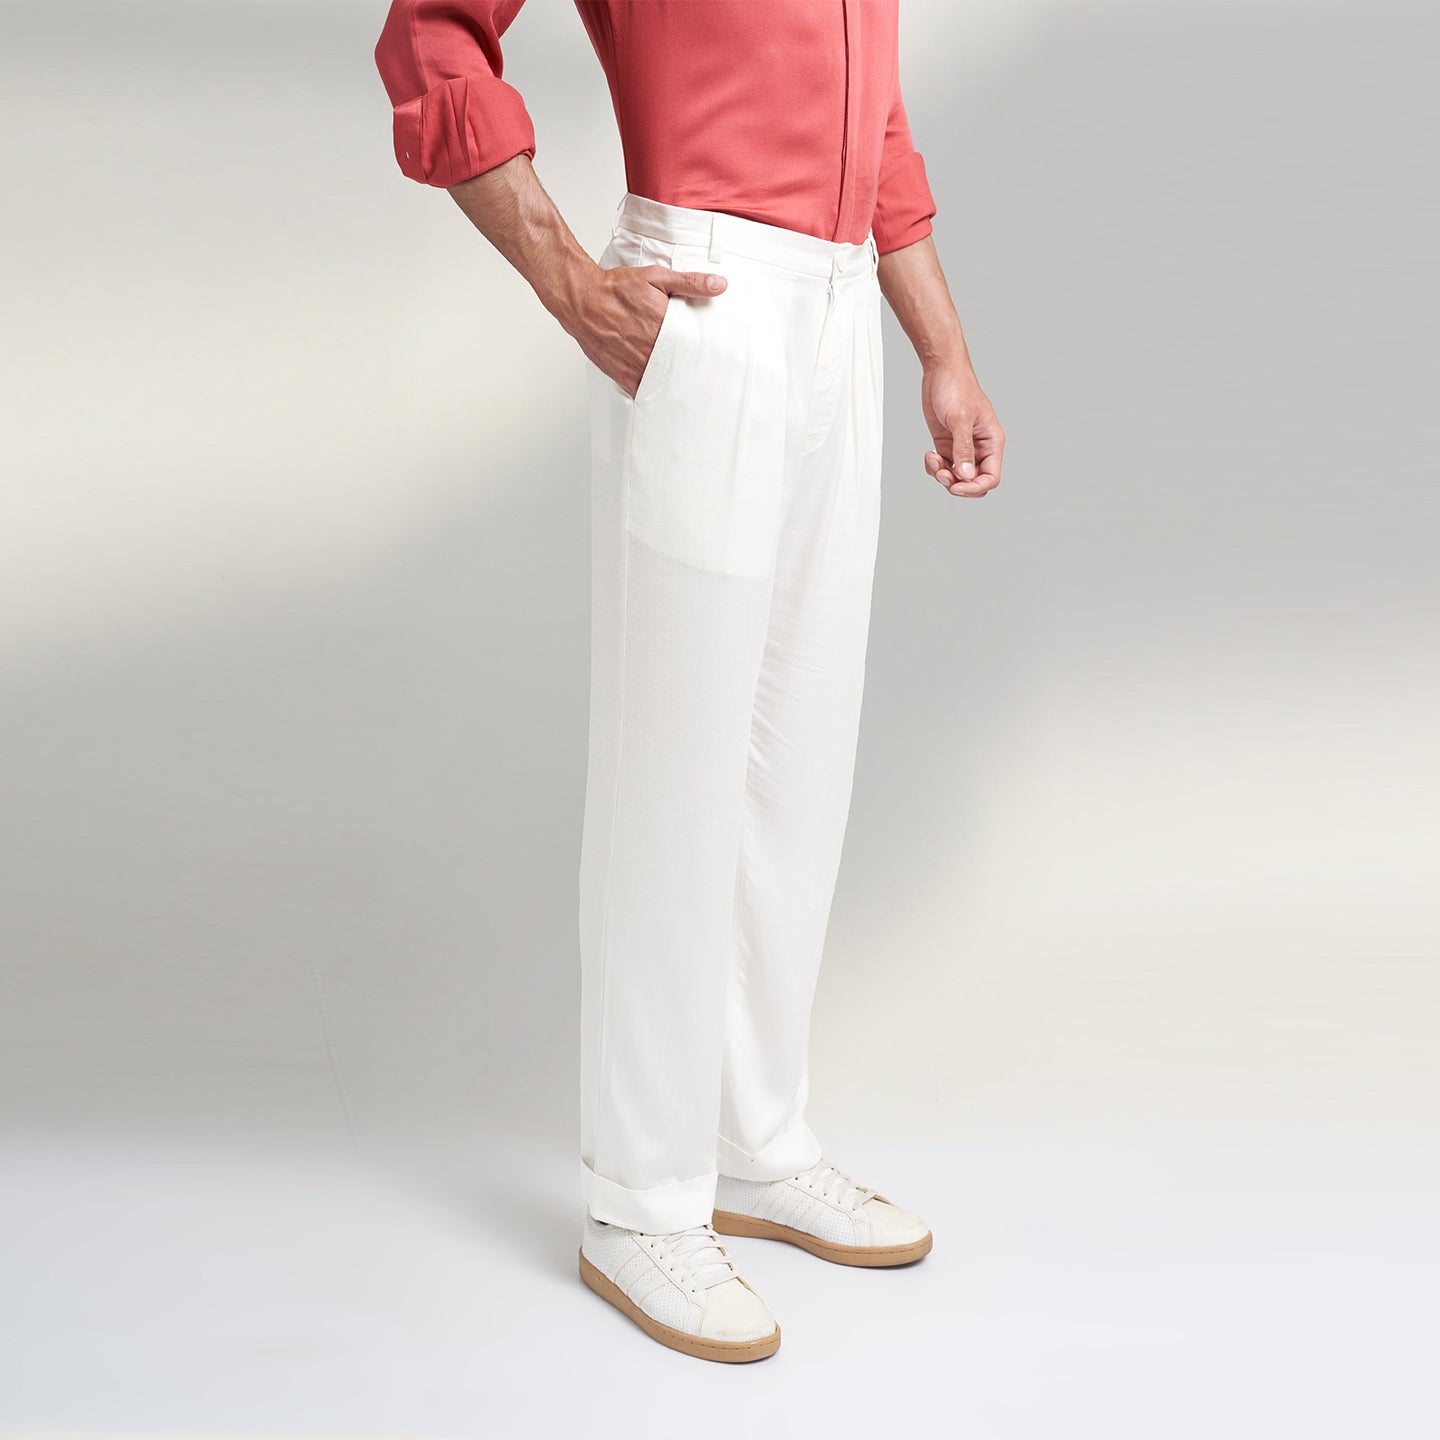 A COMFORT fit trousers in organic lotus stem fabric with 2 front pleats and turn up bottom and one back pocket details. the Trouser is super soft and comfortable to wear.